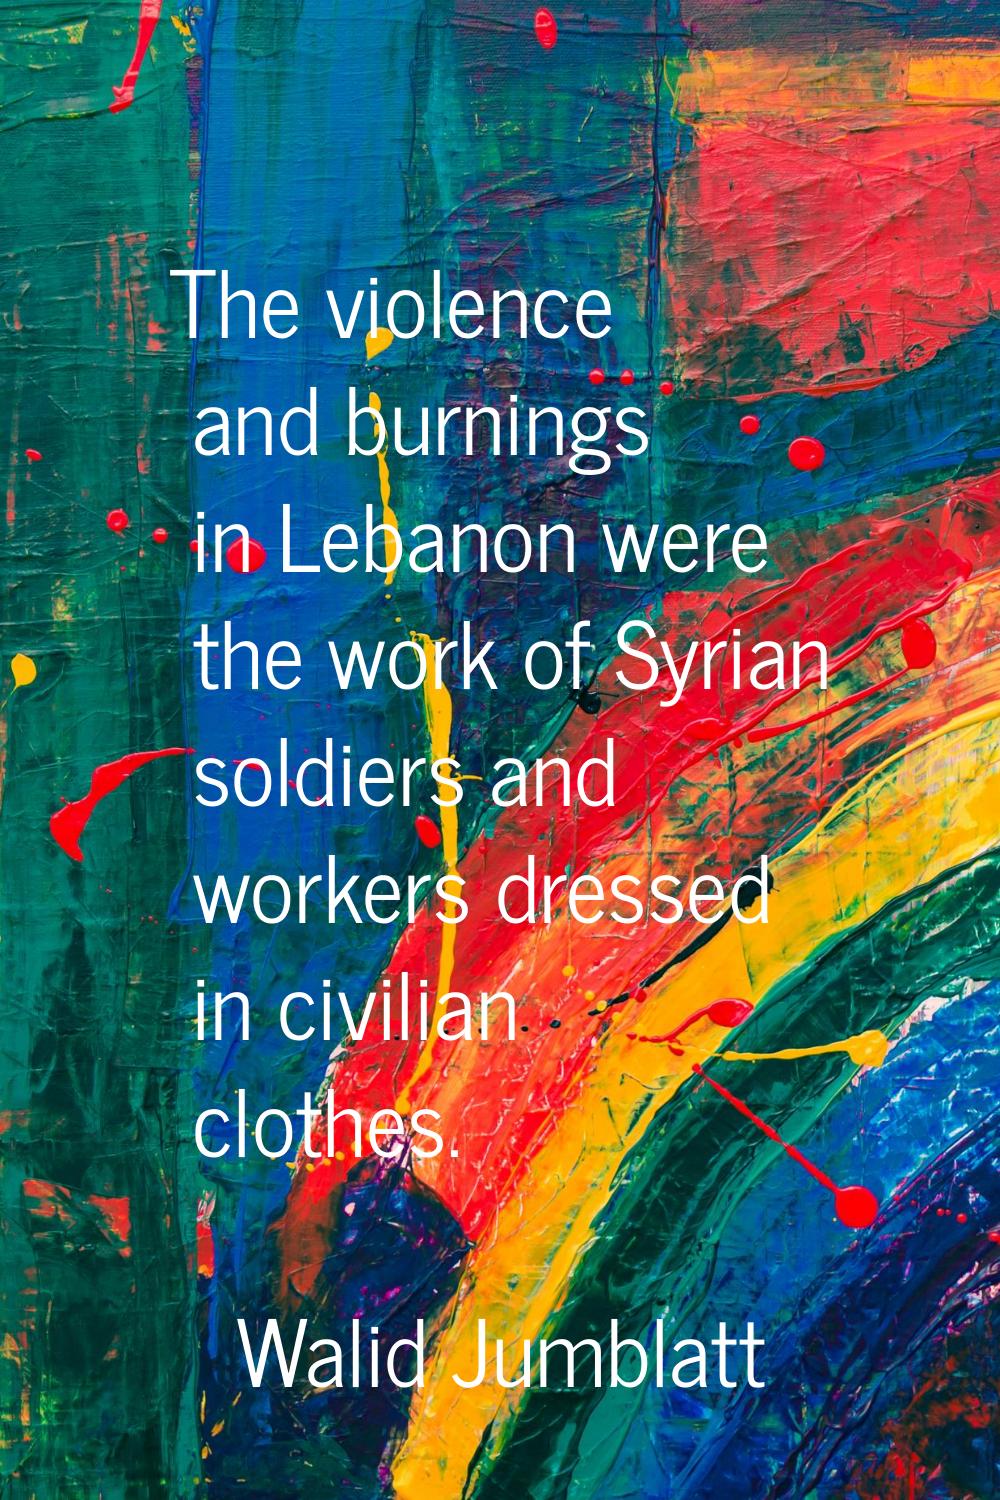 The violence and burnings in Lebanon were the work of Syrian soldiers and workers dressed in civili